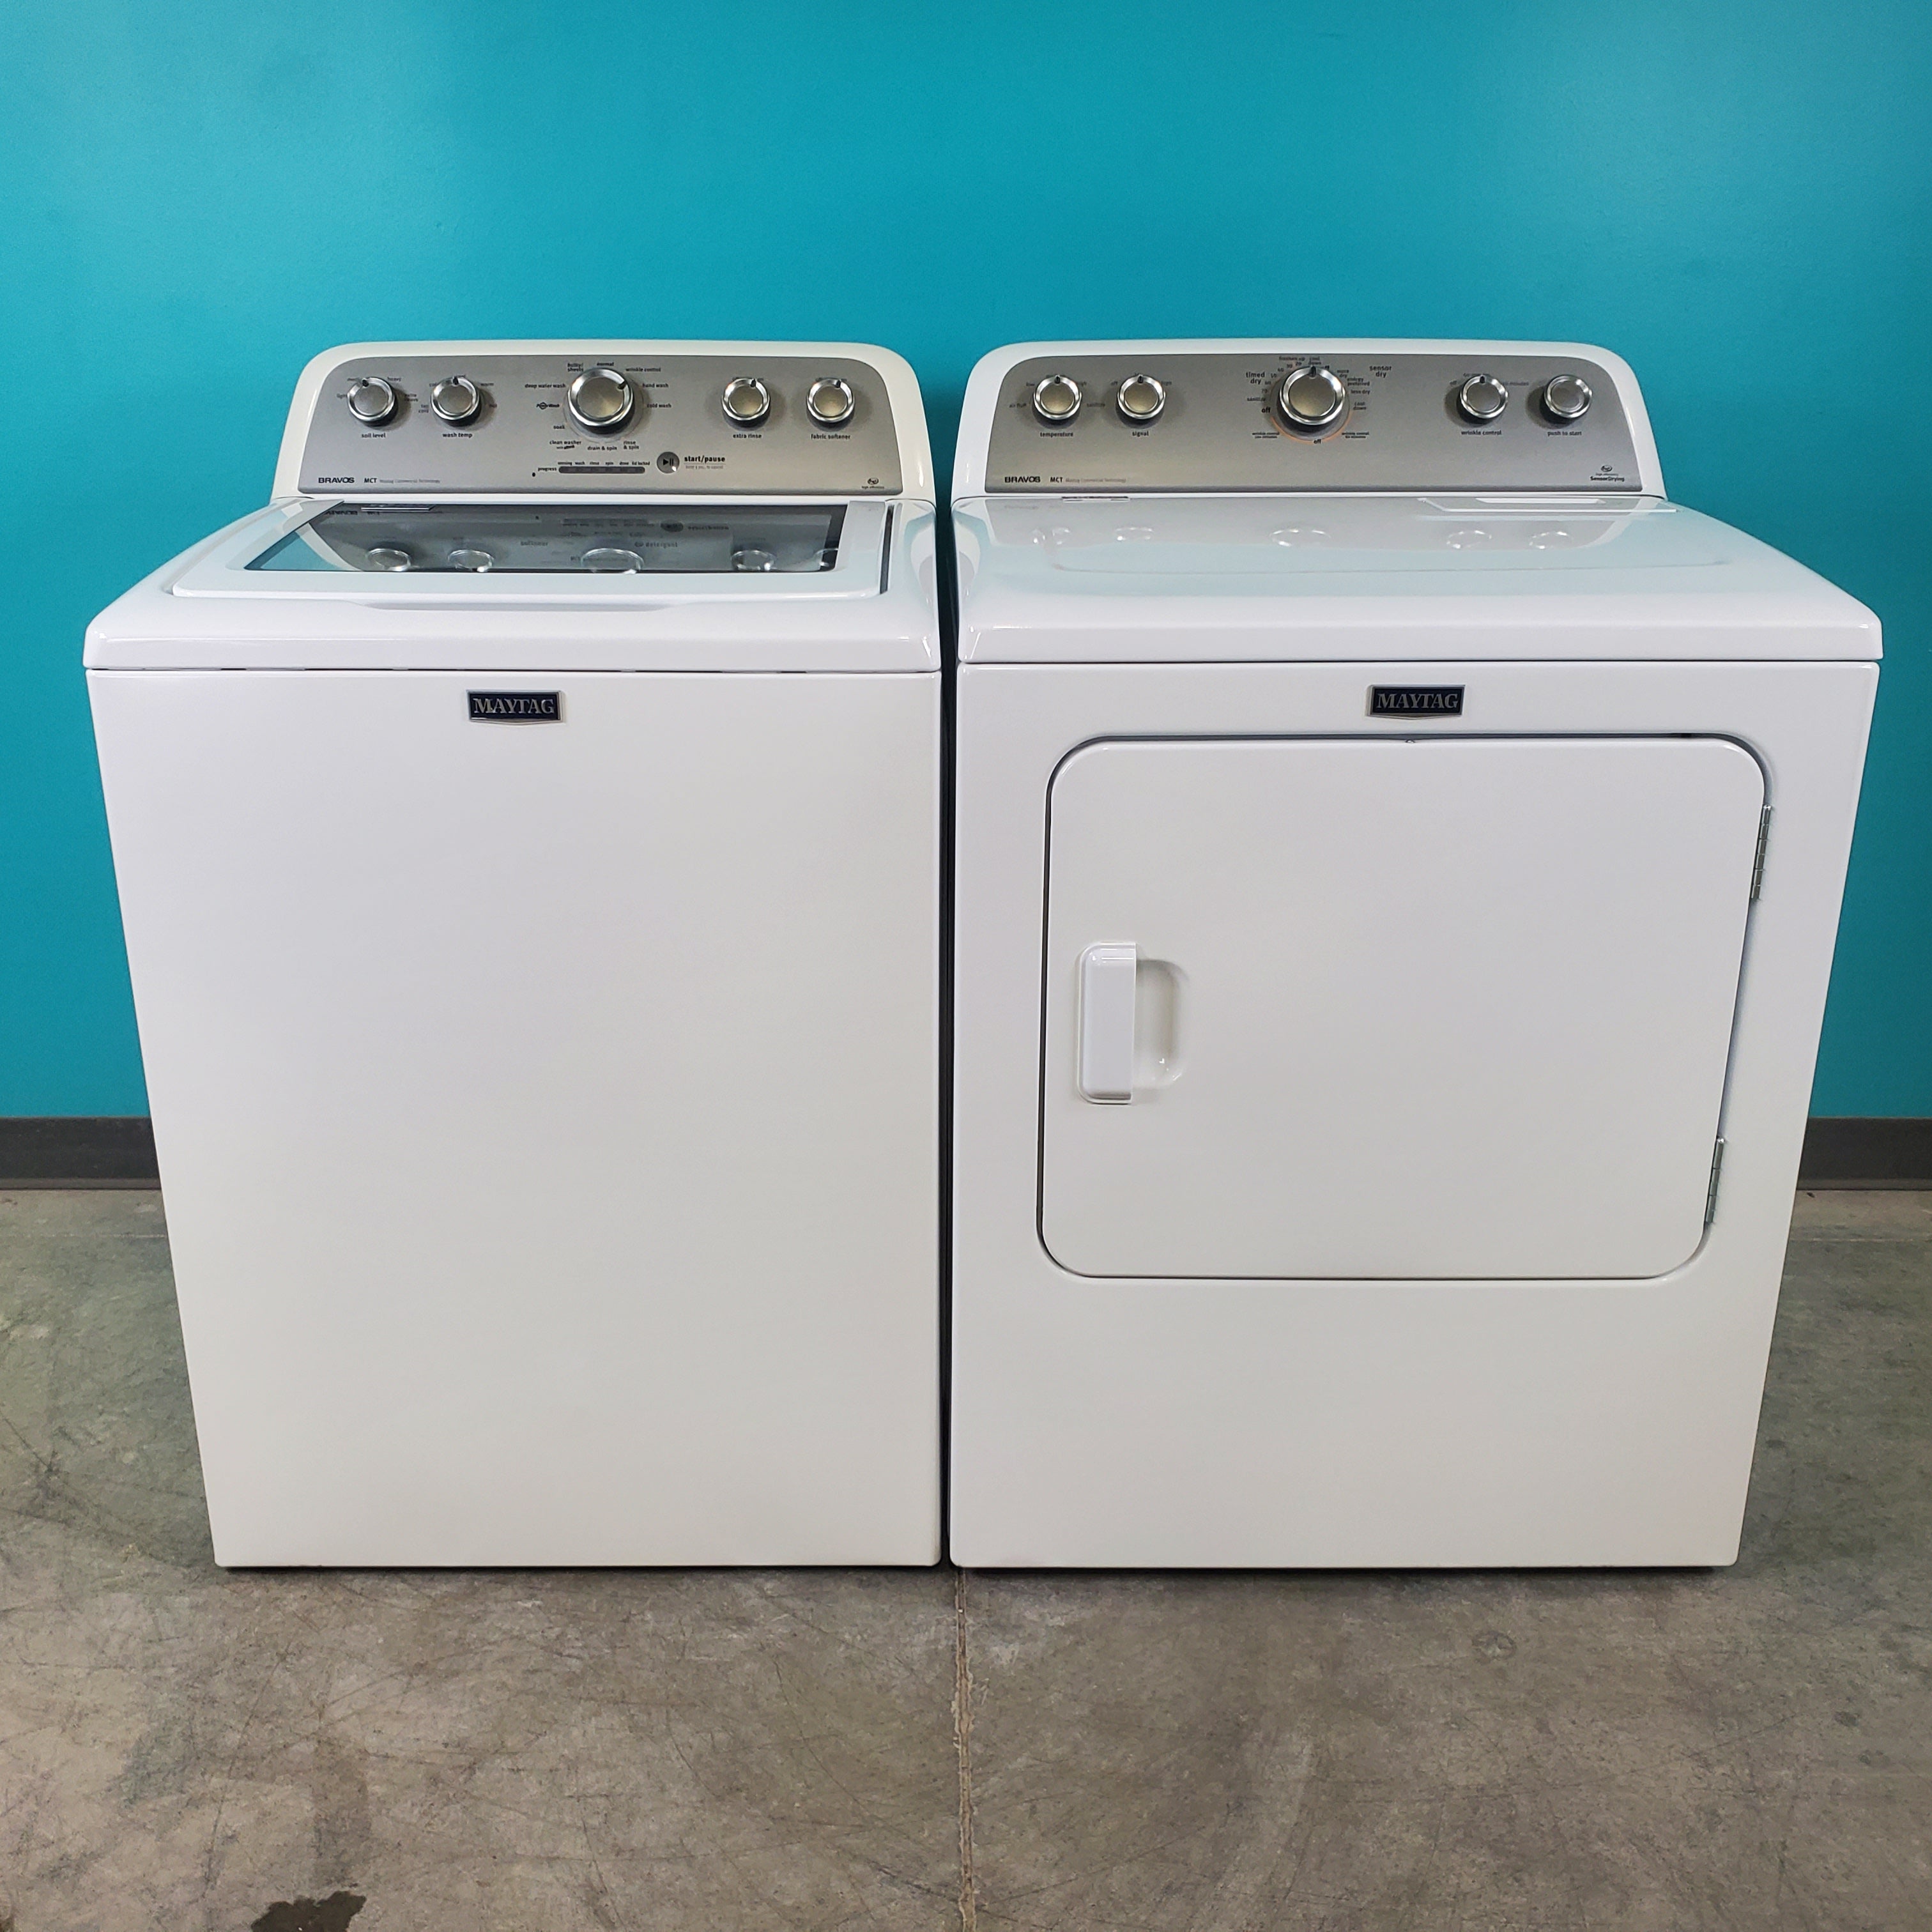 Pictures of Neu Elite Maytag Bravos High Capacity Impeller Washer & Electric Dryer Set: 4.3 cu. ft. High Capacity Impeller Washer With Extra Water Cycle / Option & 7.0 cu. ft. Gas Dryer With Auto Sensor Dry  - Certified Refurbished - Neu Appliance Outlet - Discount Appliance Outlet in Austin, Tx